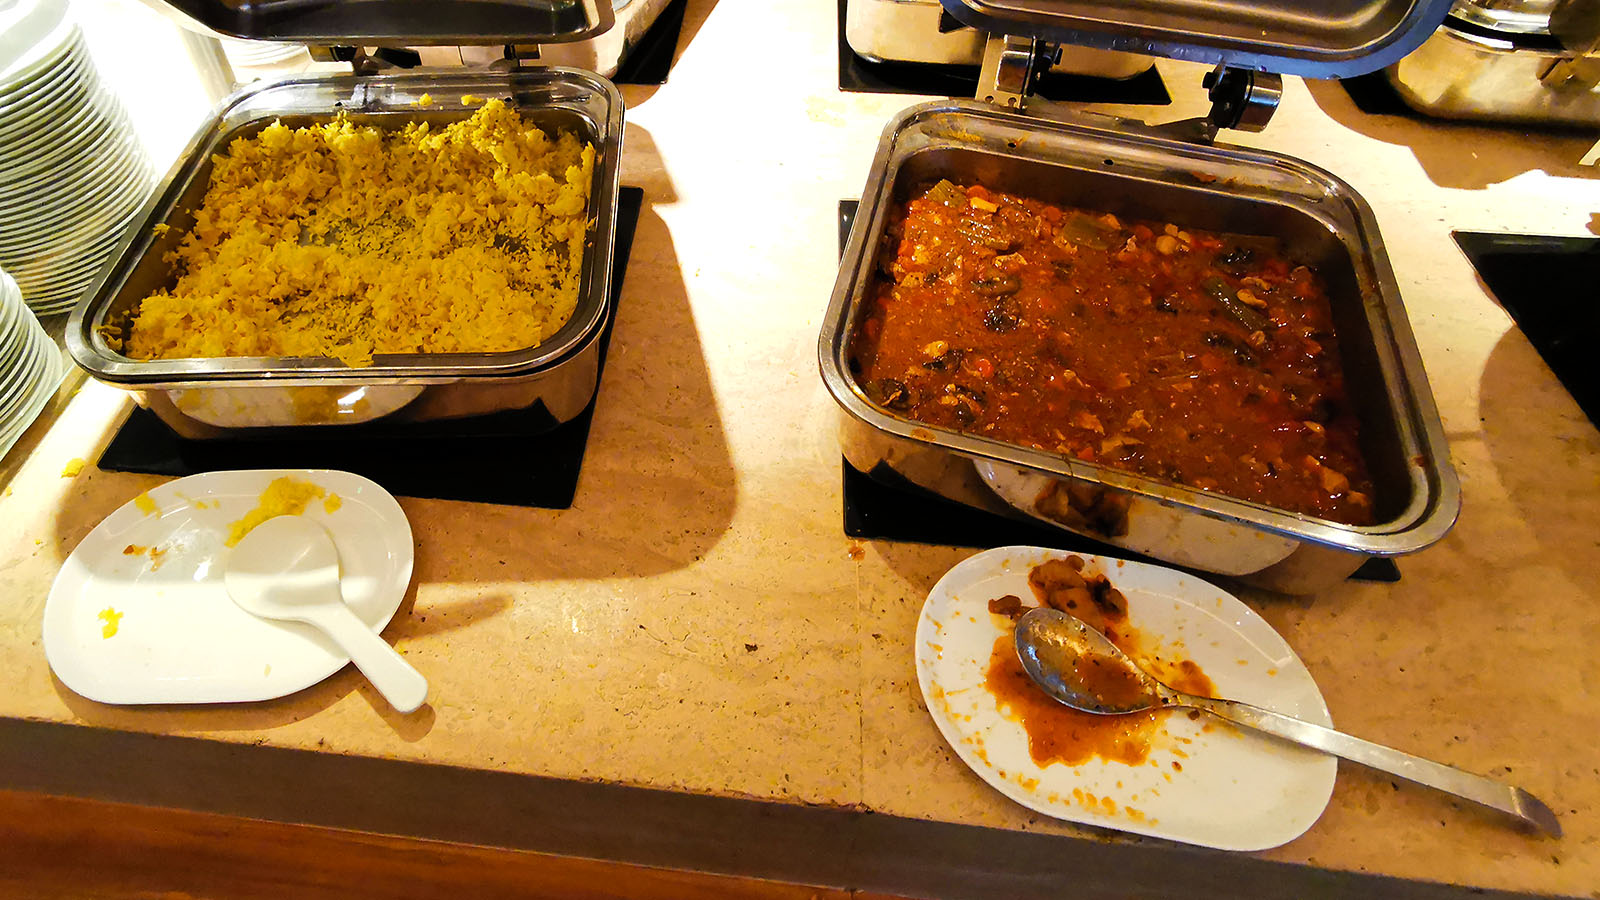 Curry with rice in the Qantas International Business Lounge in Los Angeles